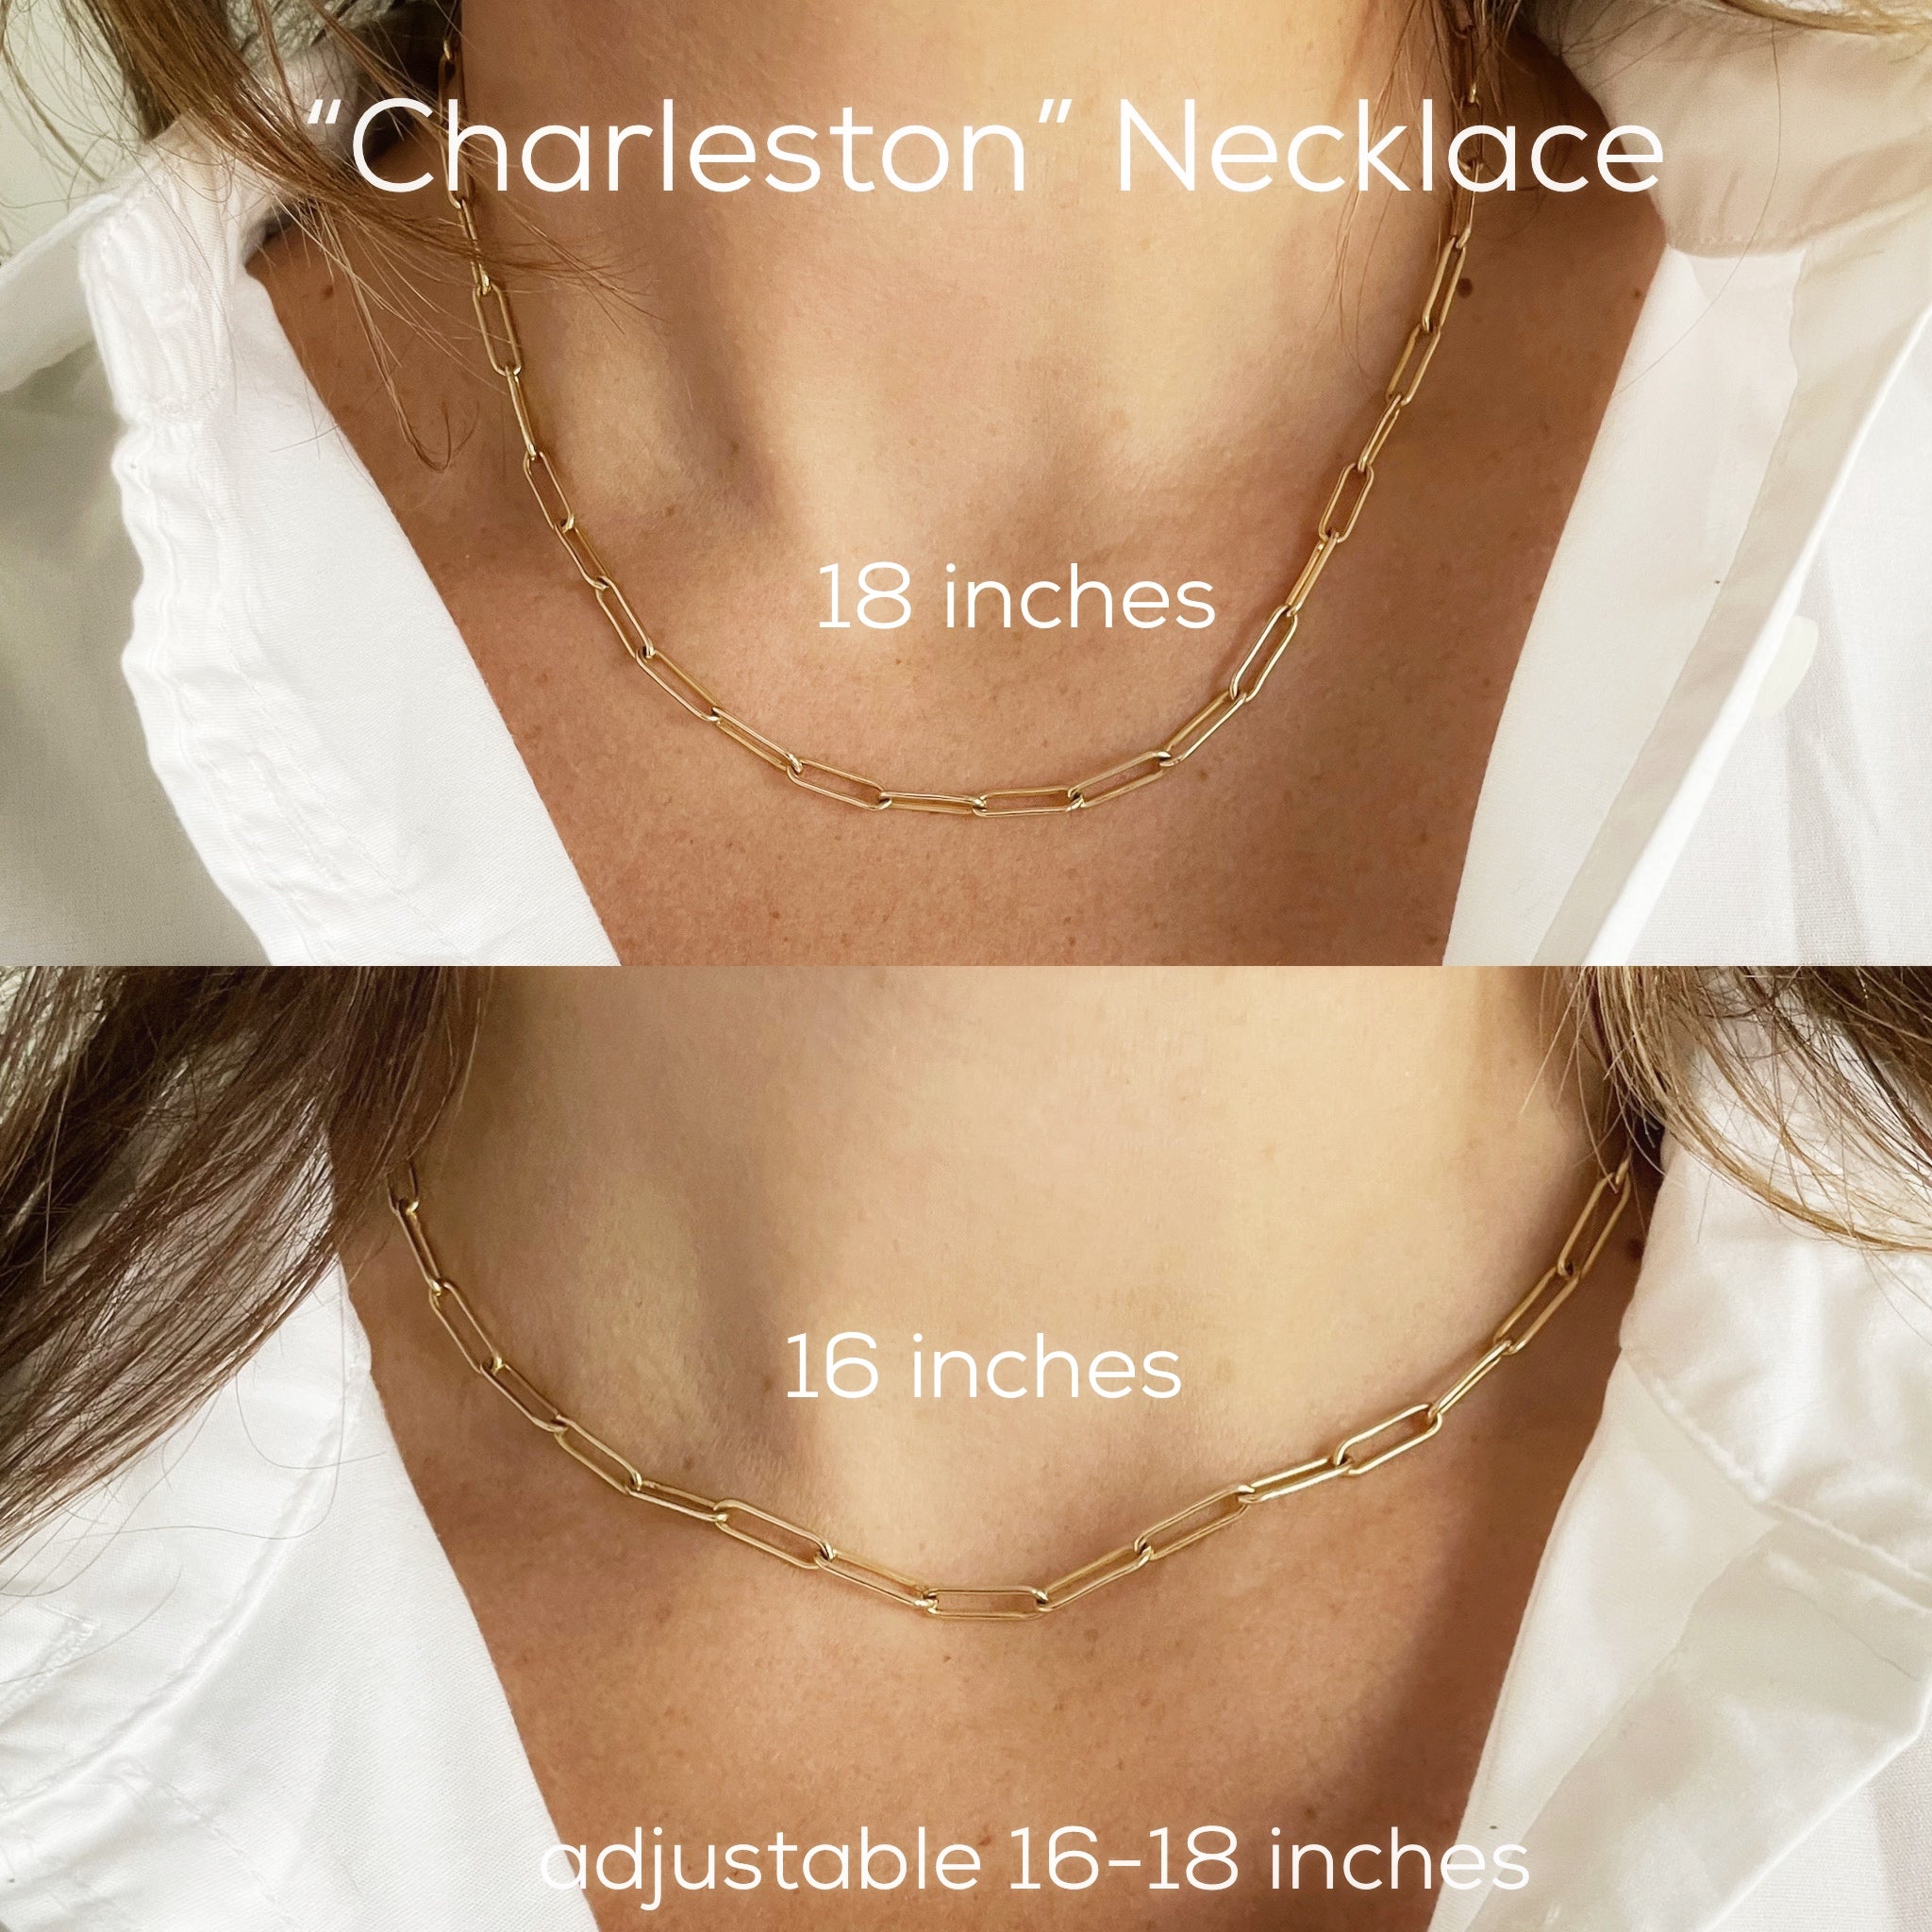 Women's necks wearing gold chunky large link paperclip chain layering necklaces. Charleston Necklace by Sarah Cornwell Jewelry